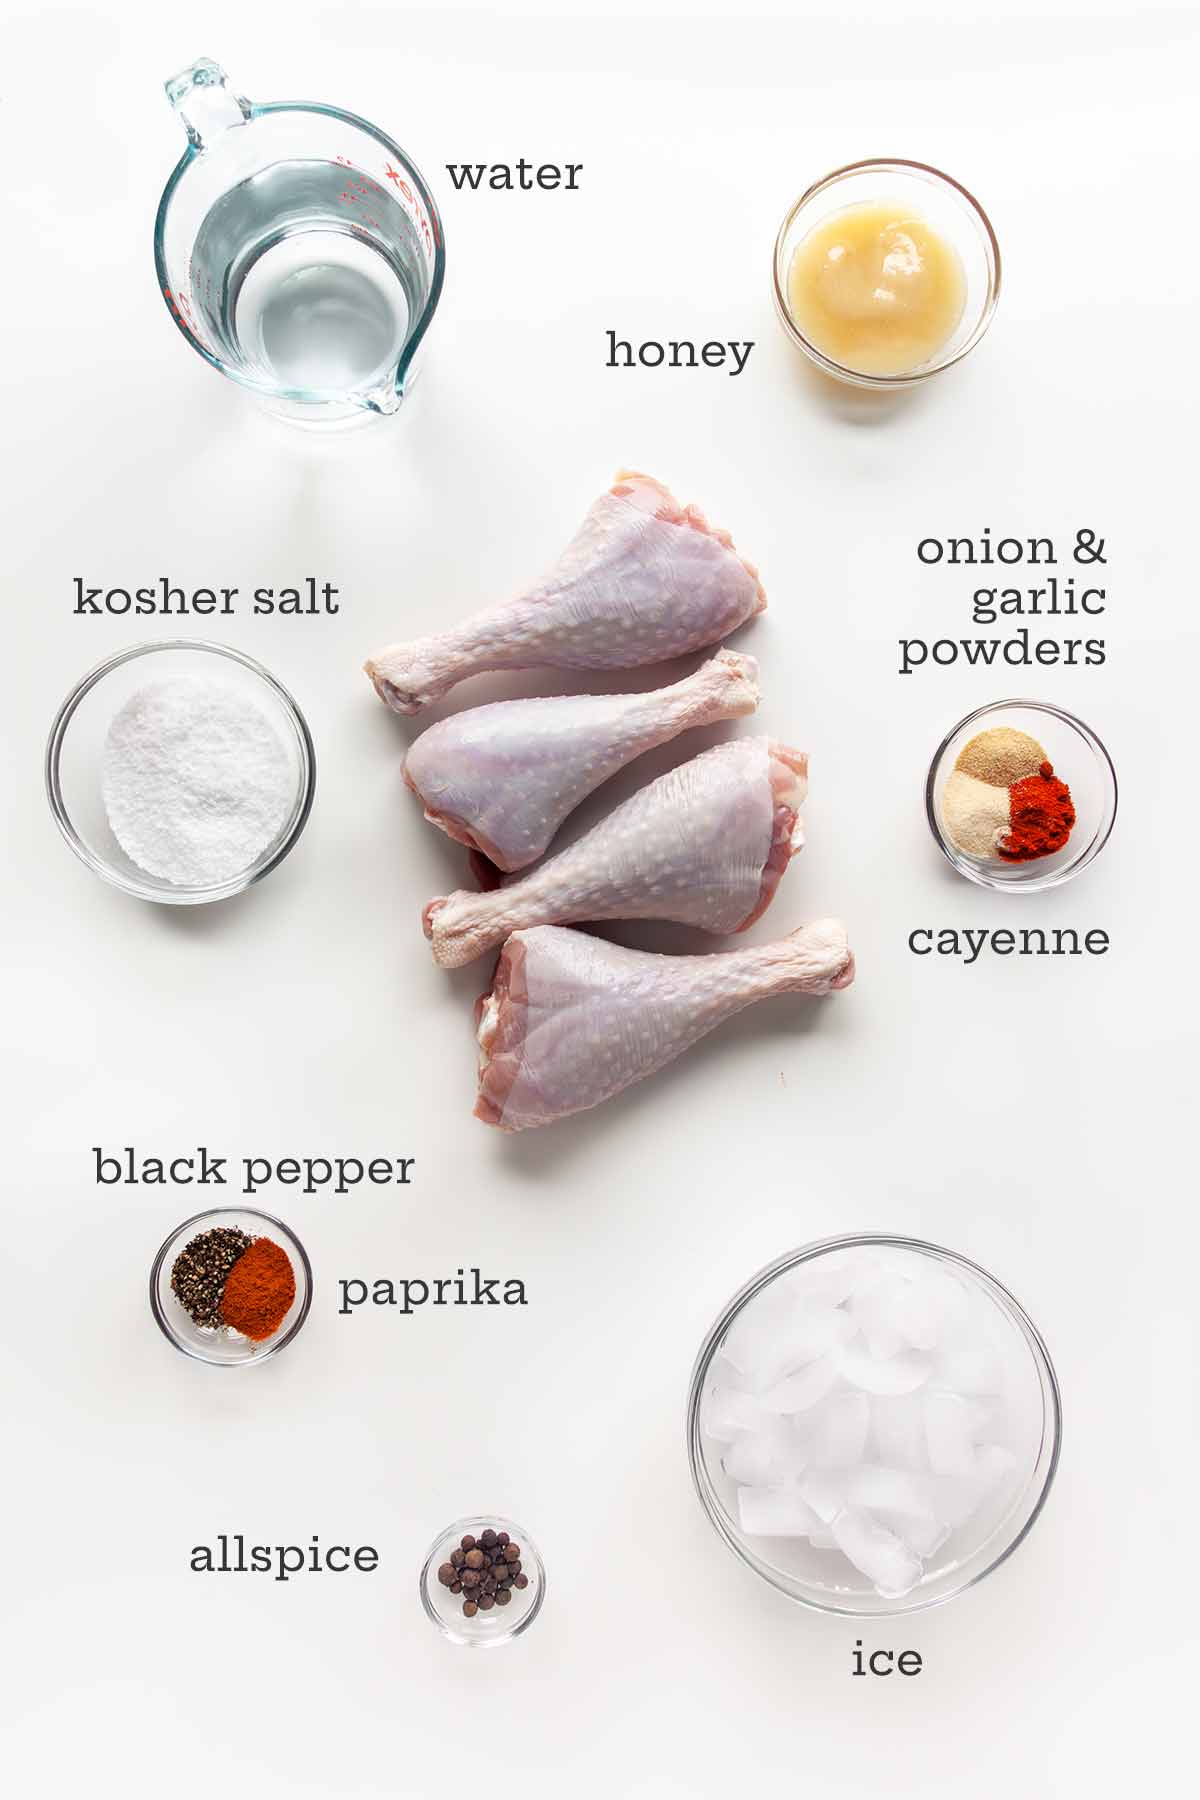 Ingredients for smoked turkey legs -- turkey legs, water, honey, spices, and ice.